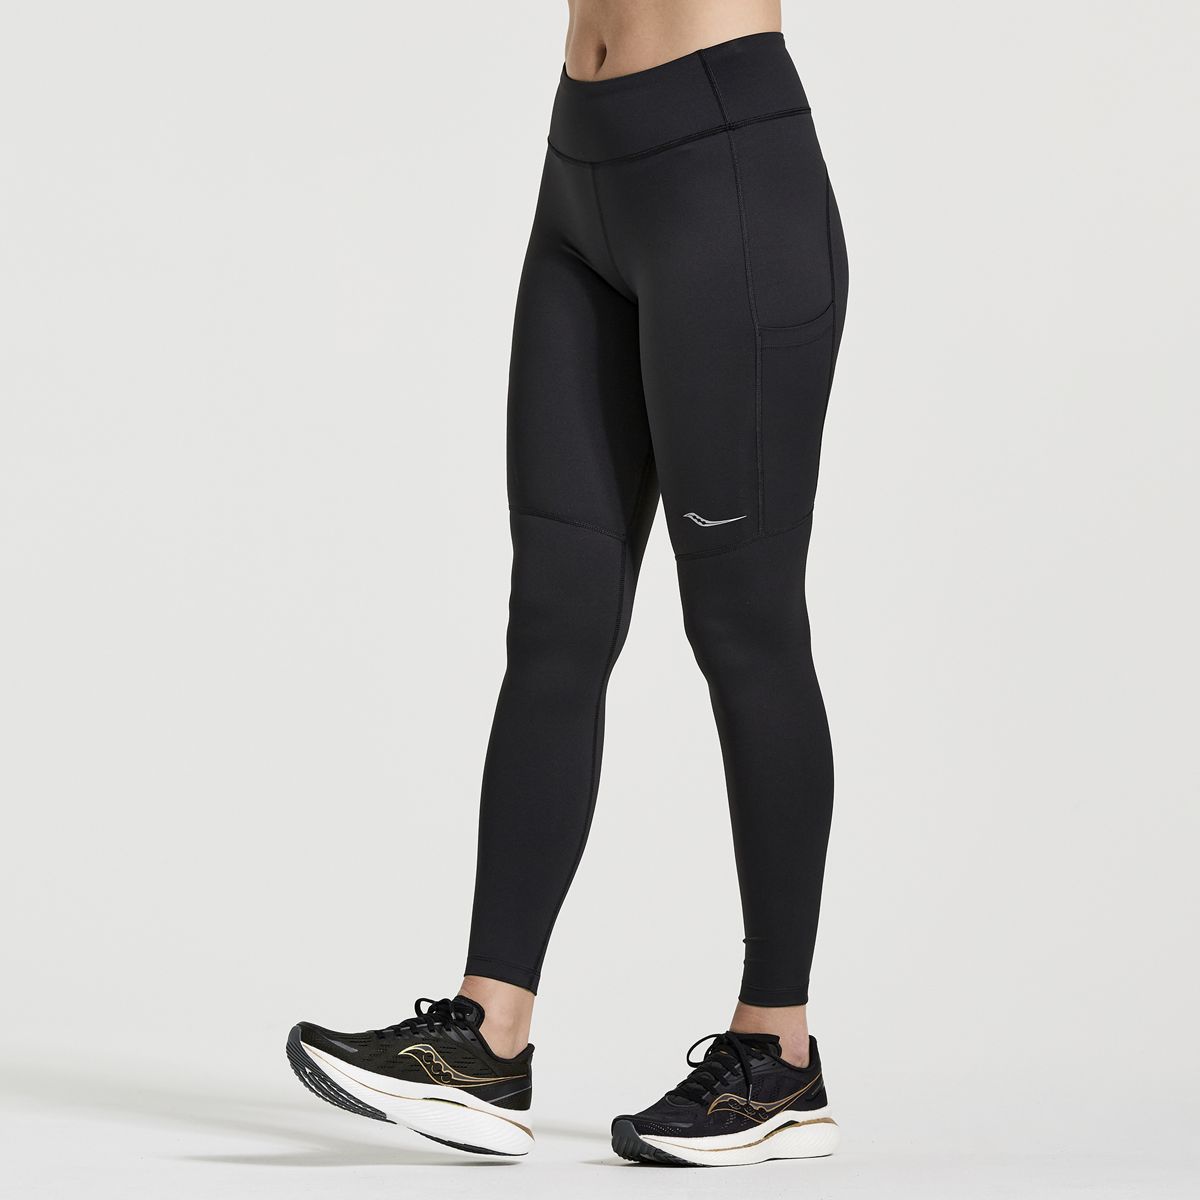 Women's Fortify Tight - View All